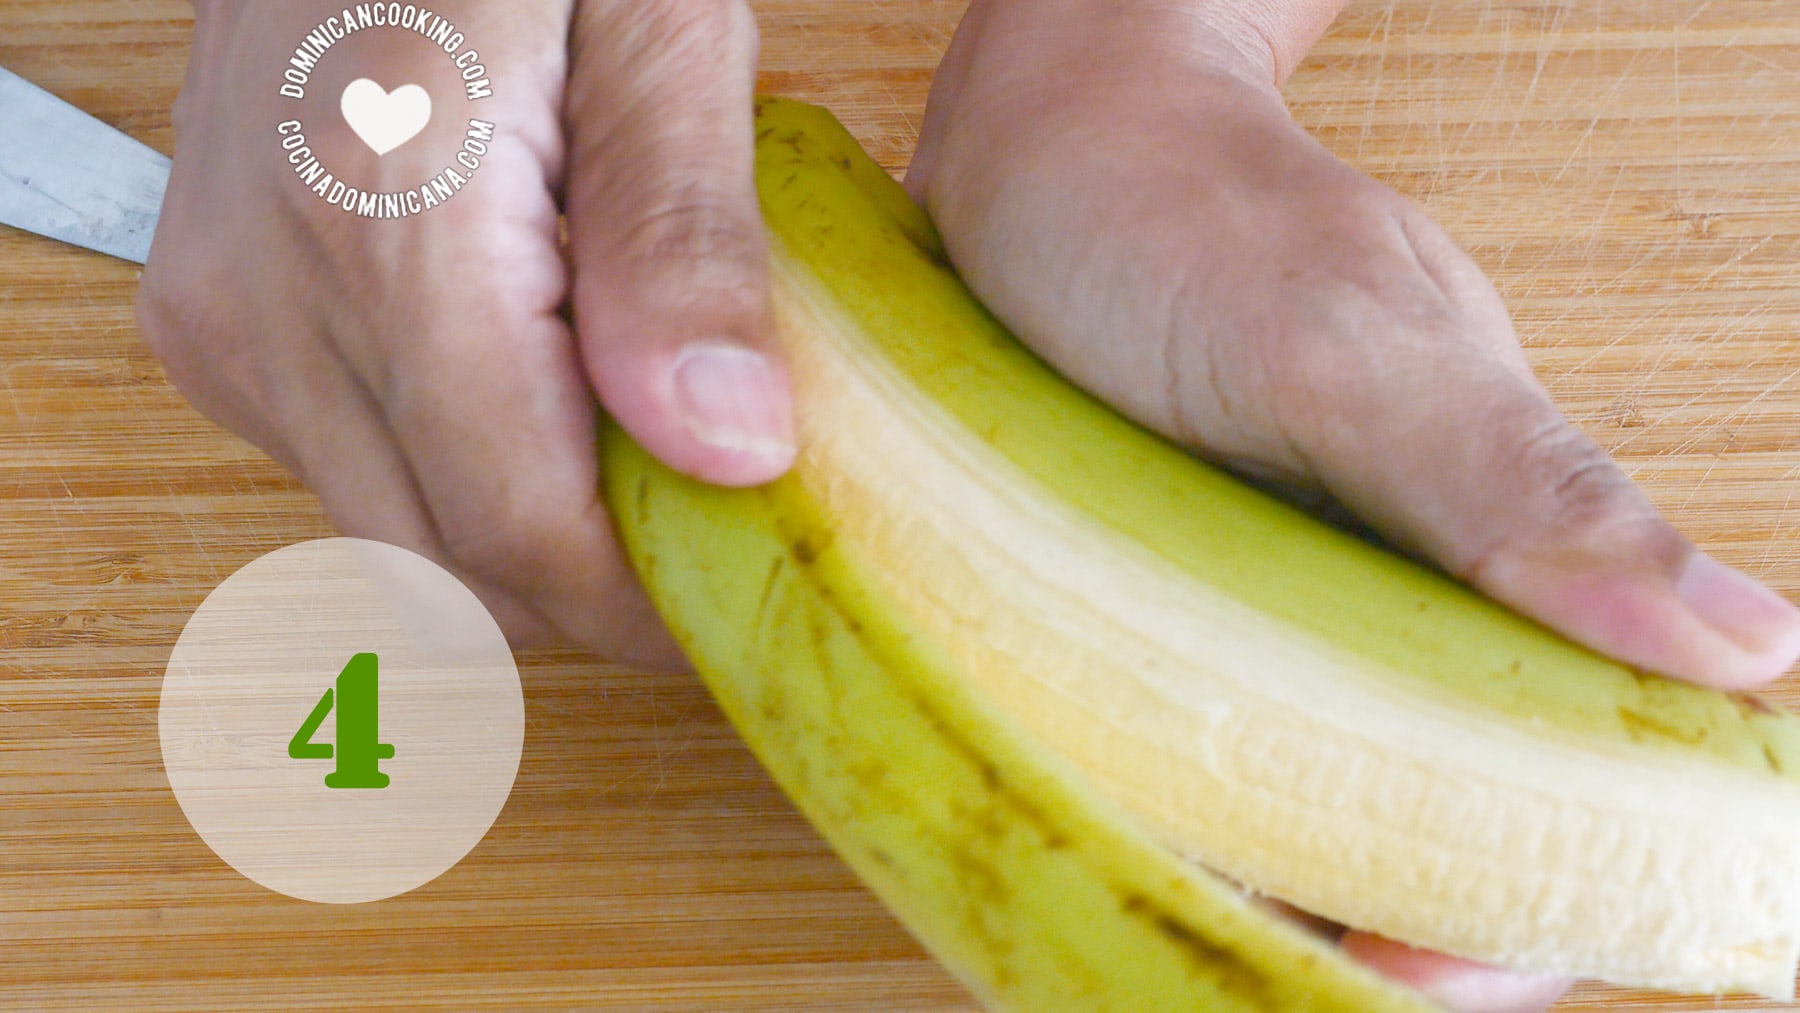 How to peel plantains